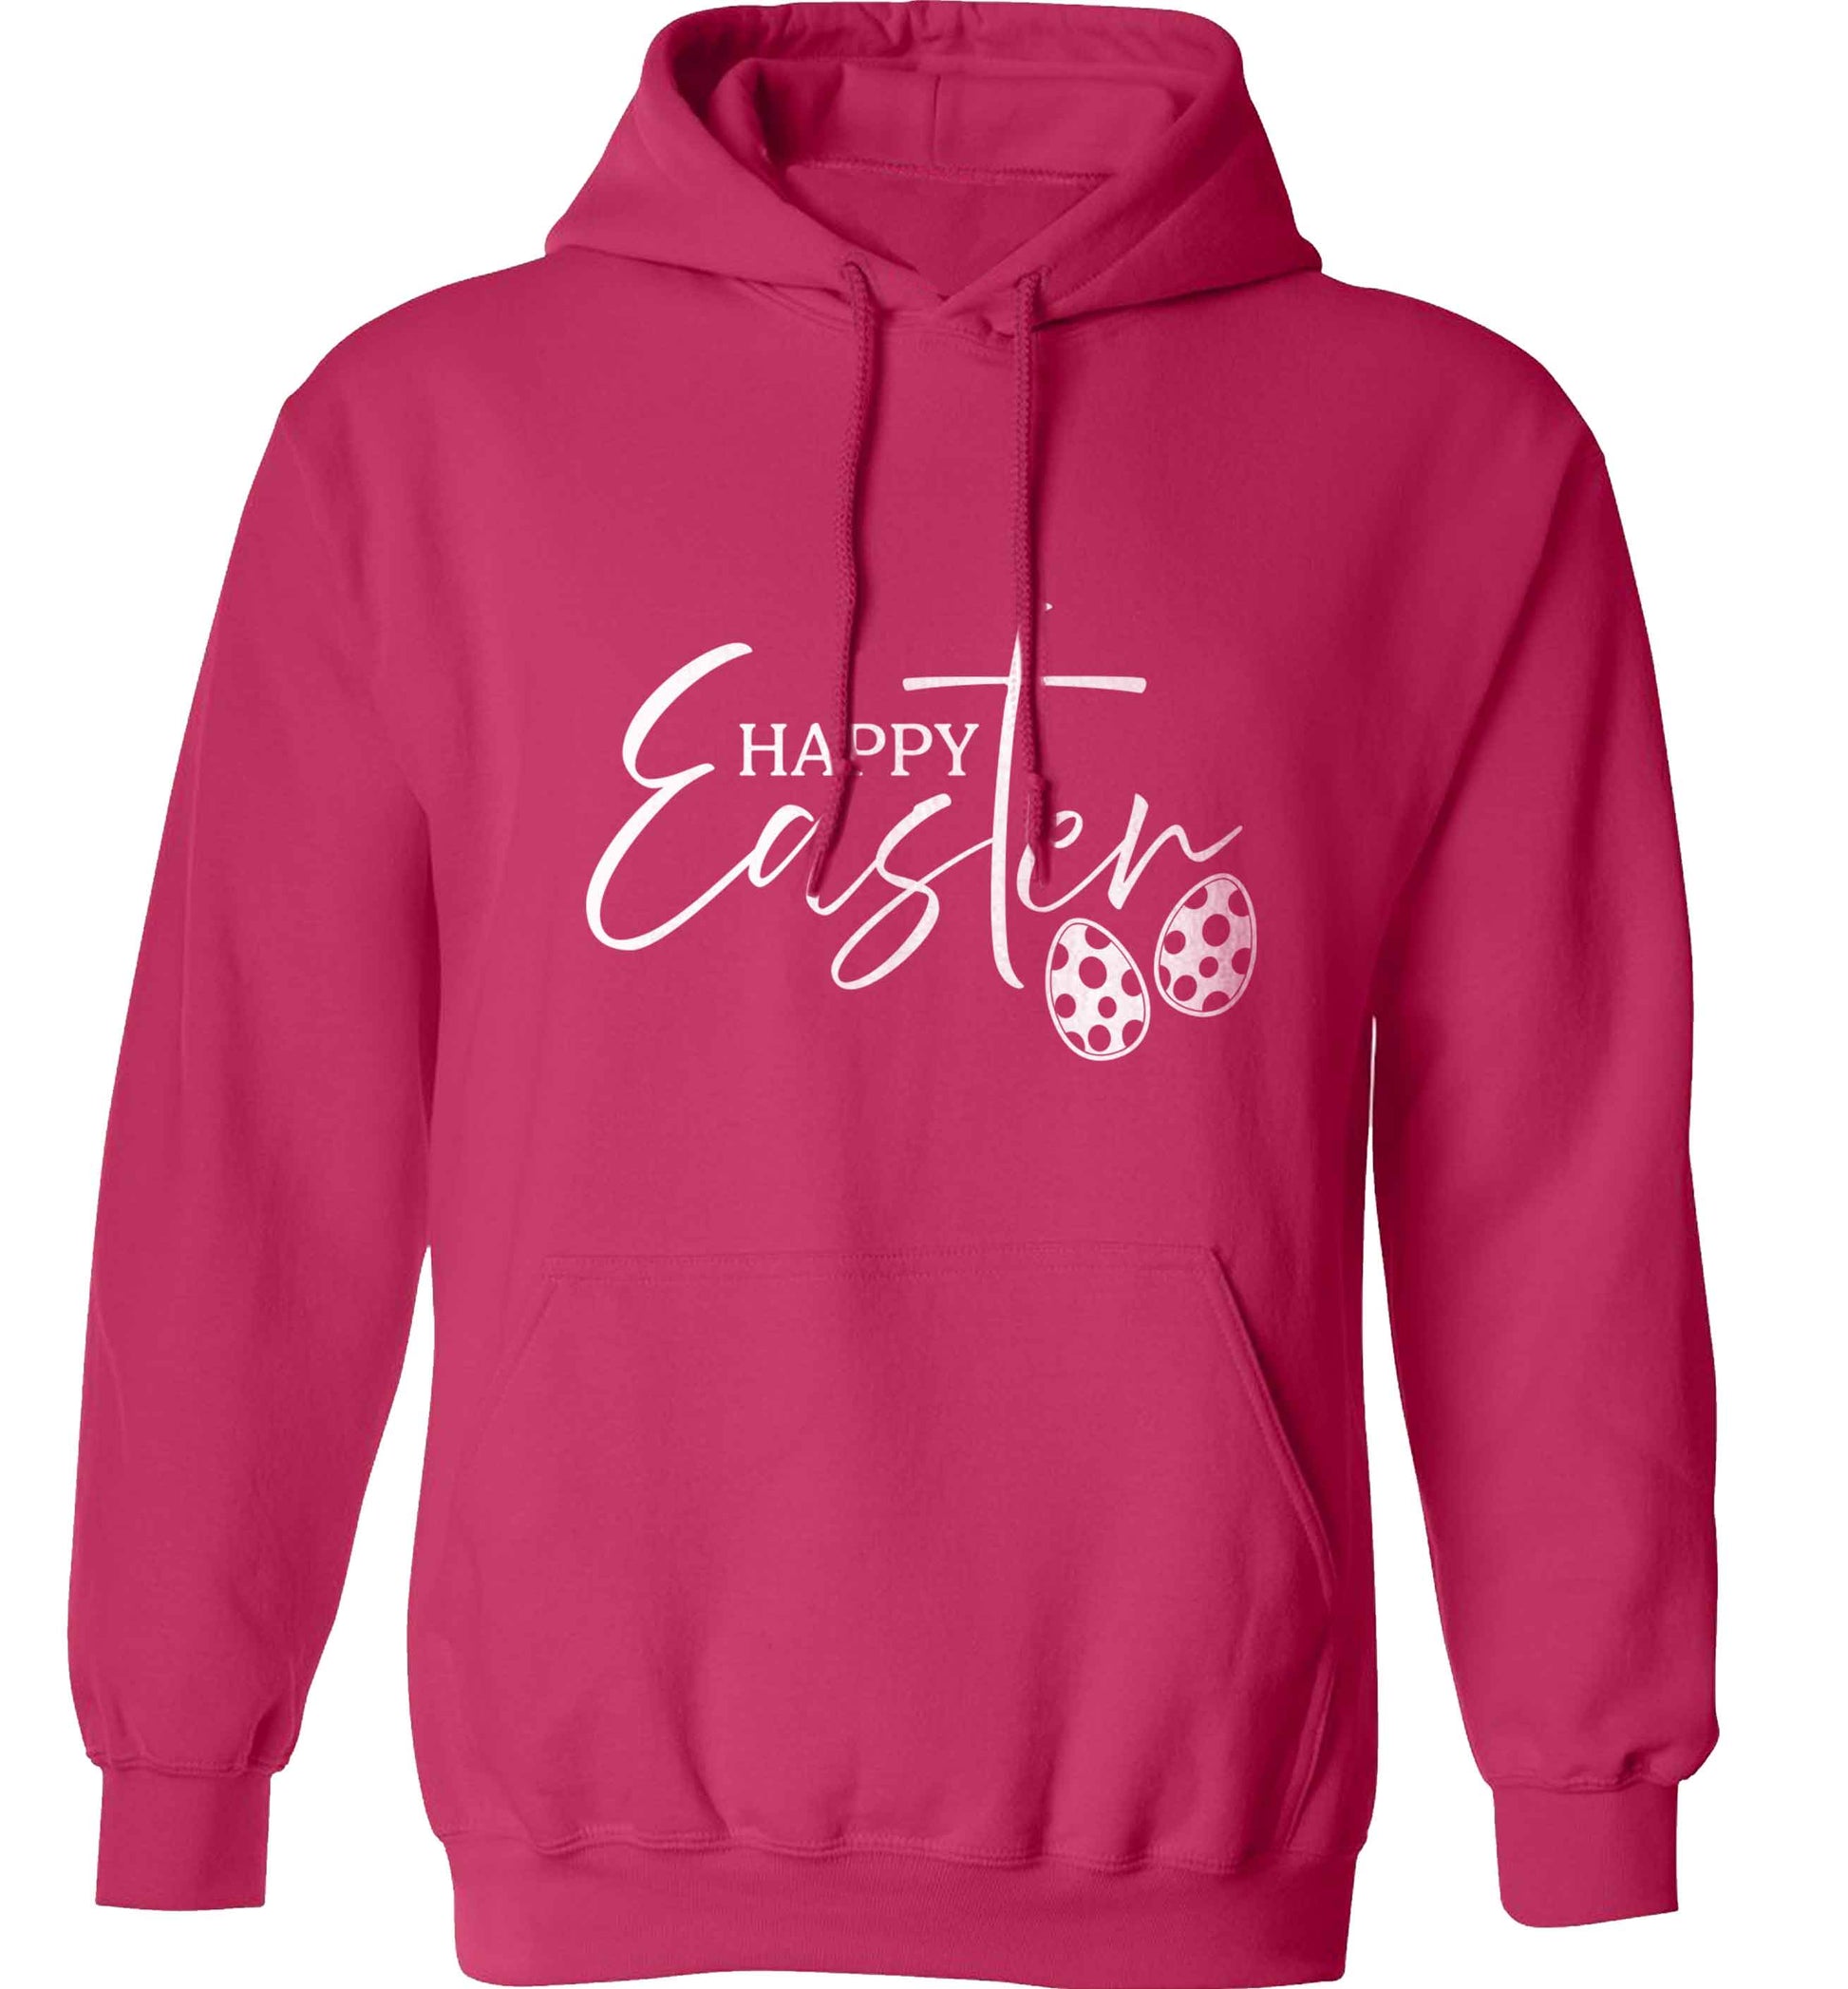 Happy Easter adults unisex pink hoodie 2XL